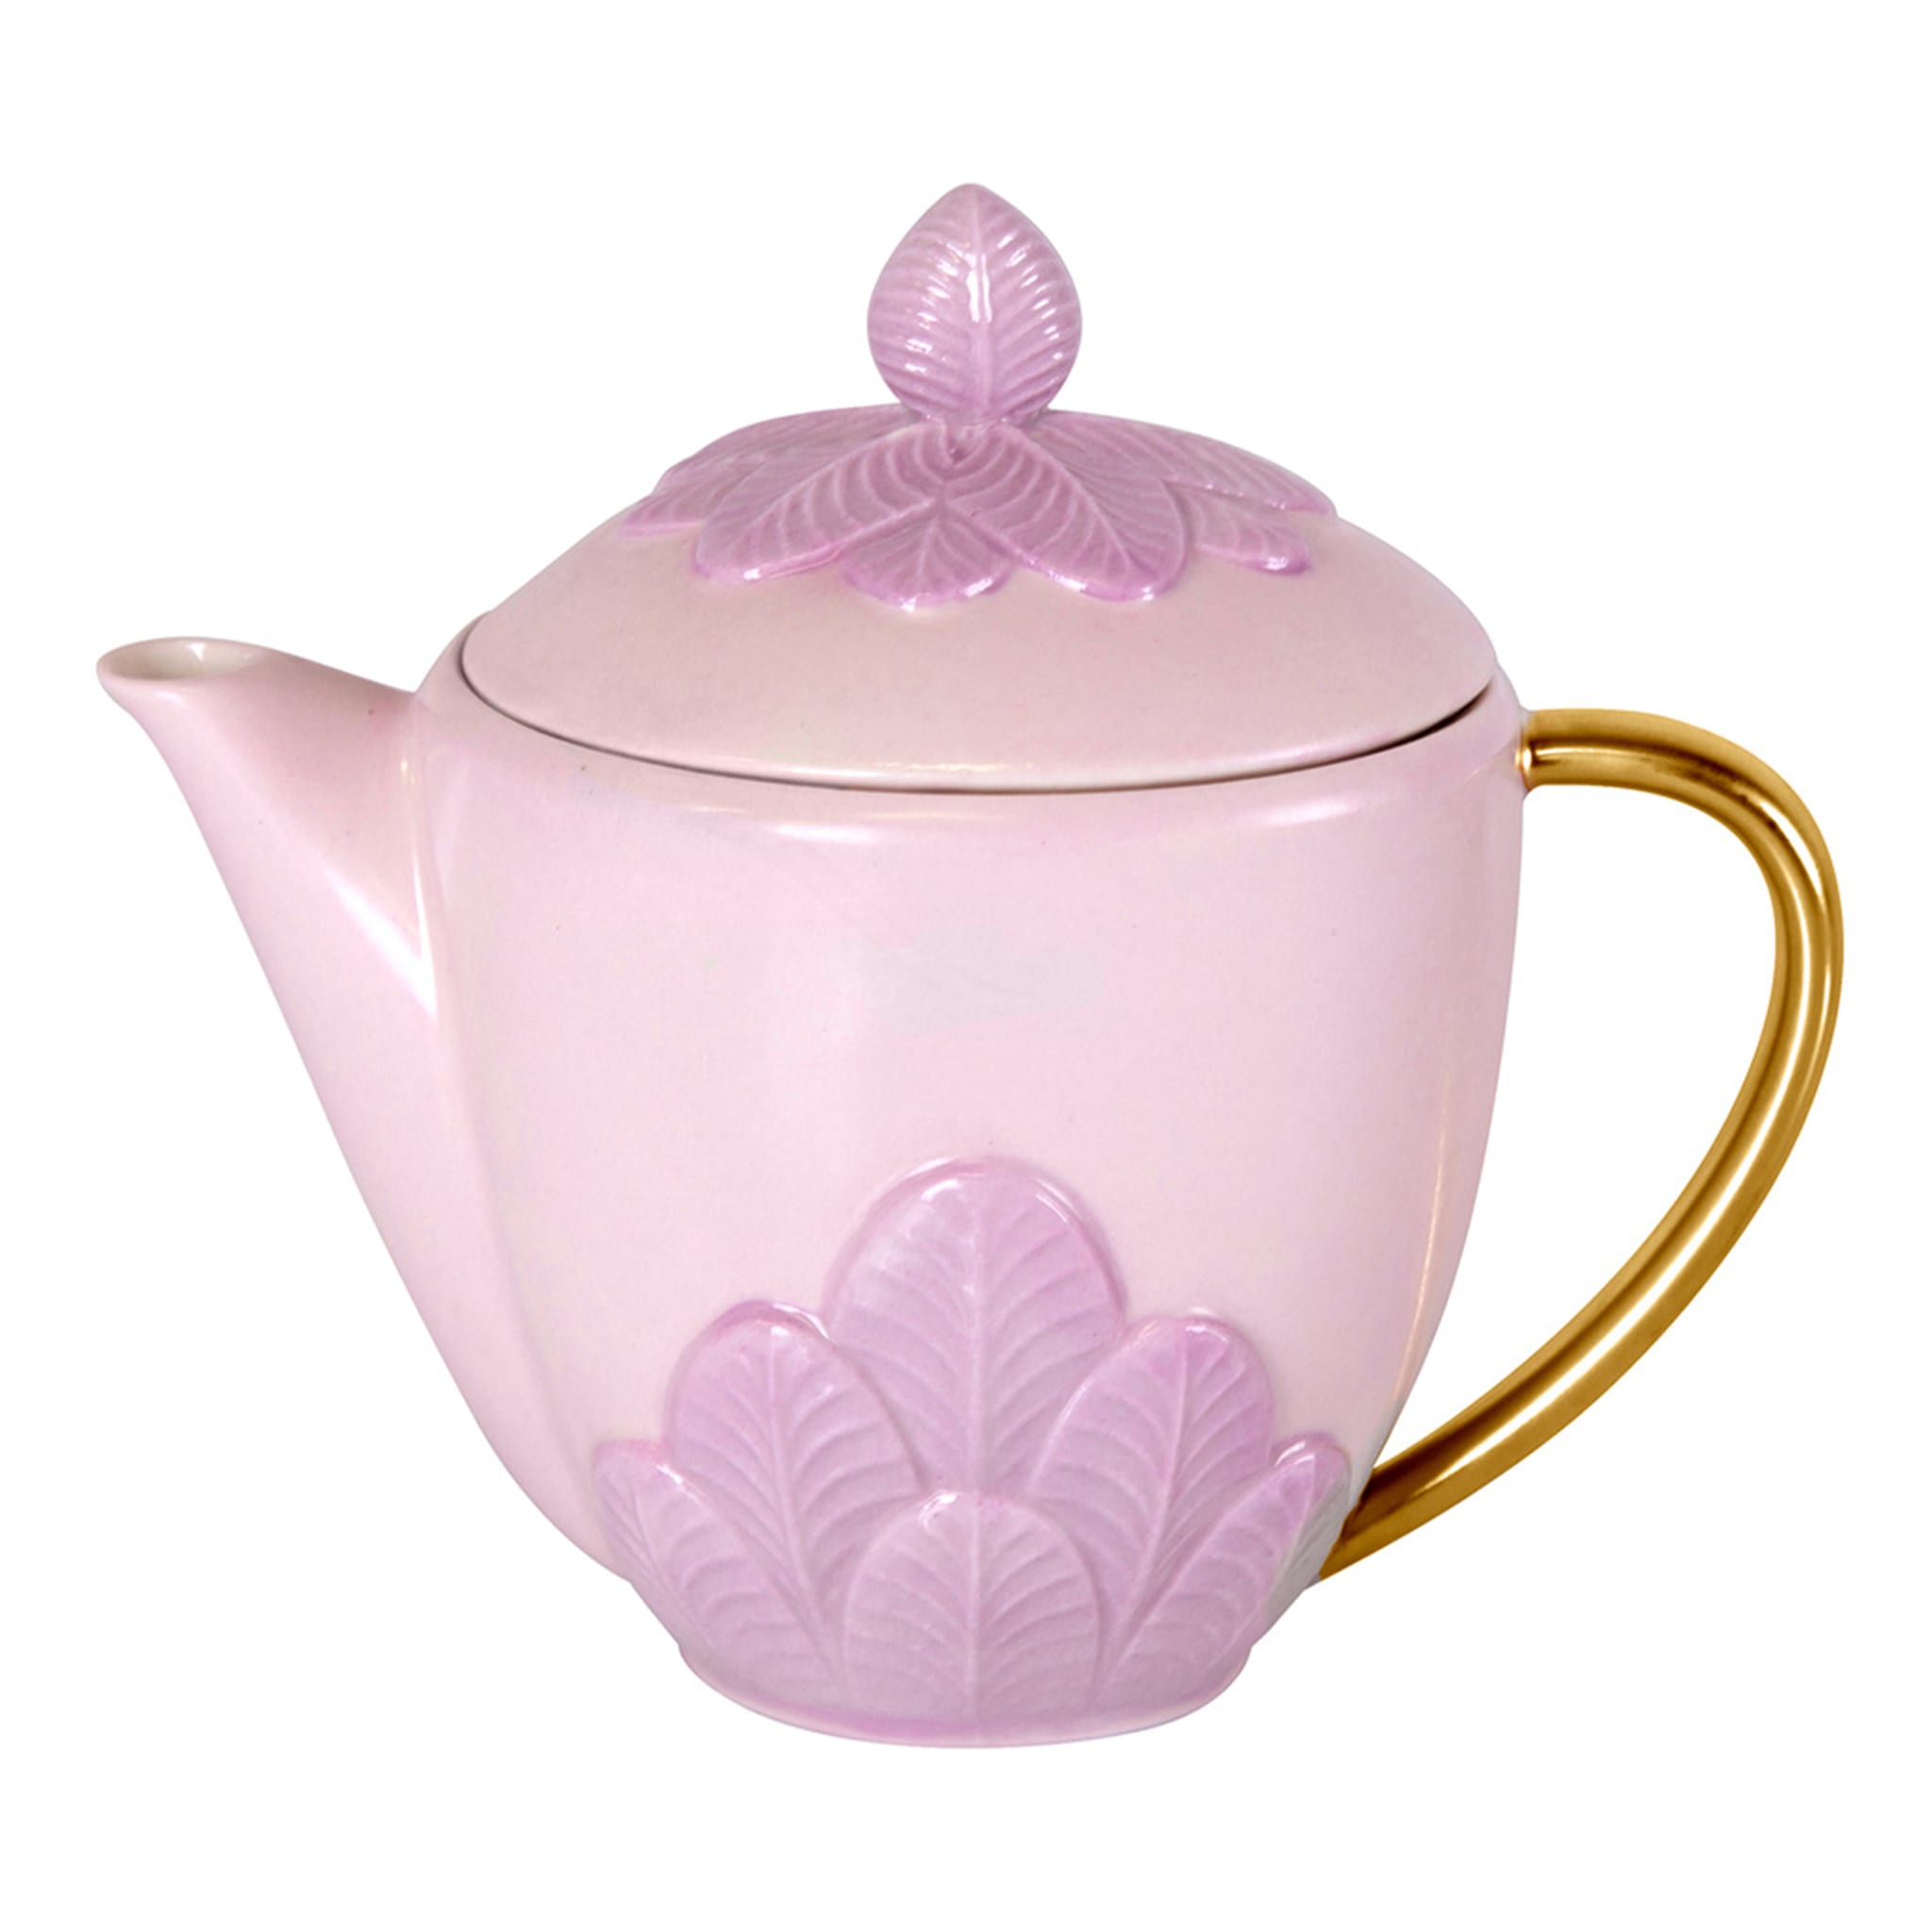 PEACOCK CREAMER - PINK AND GOLD - Main view